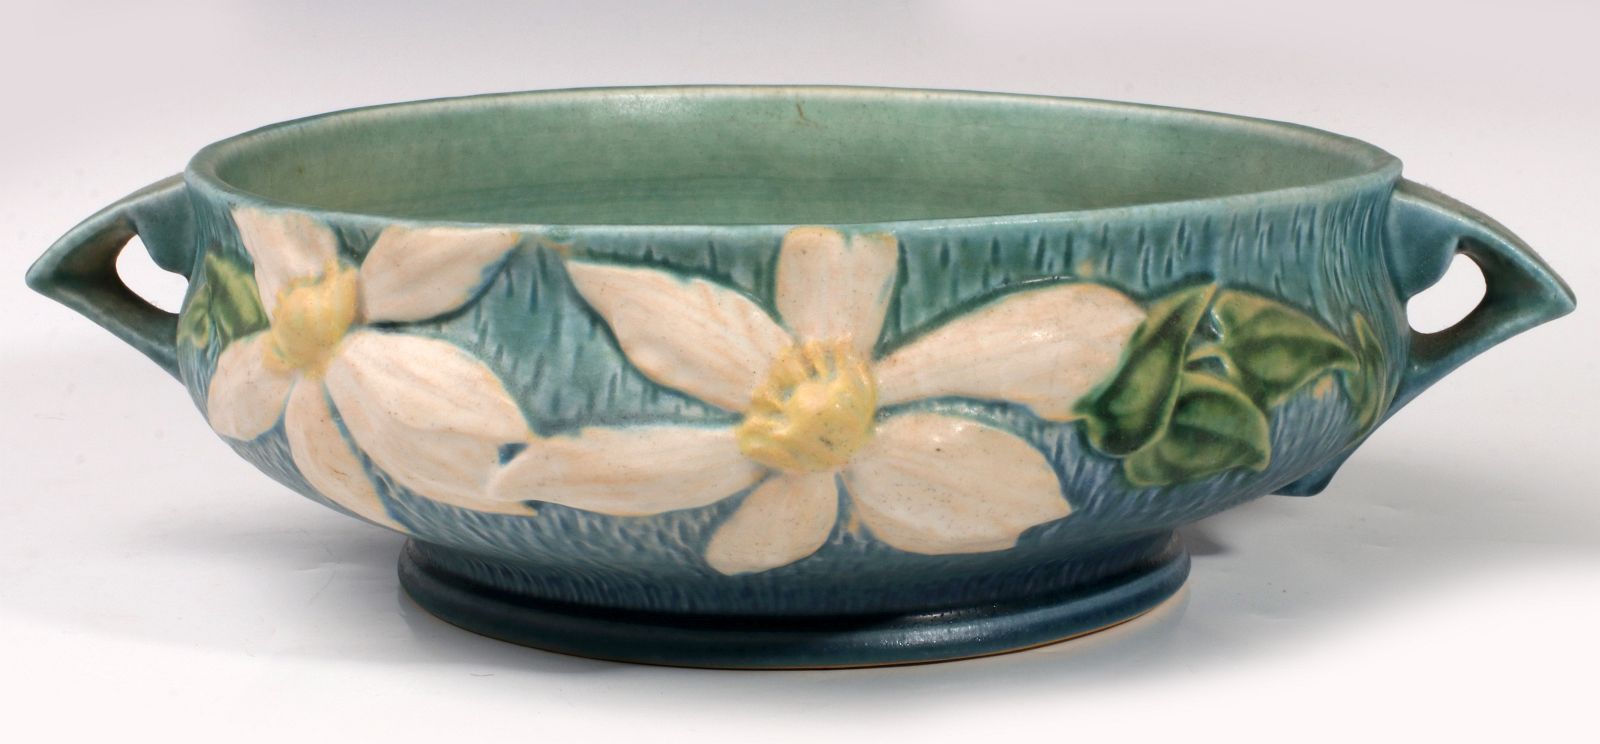 A ROSEVILLE 'CLEMATIS' ART POTTERY CONSOLE BOWL